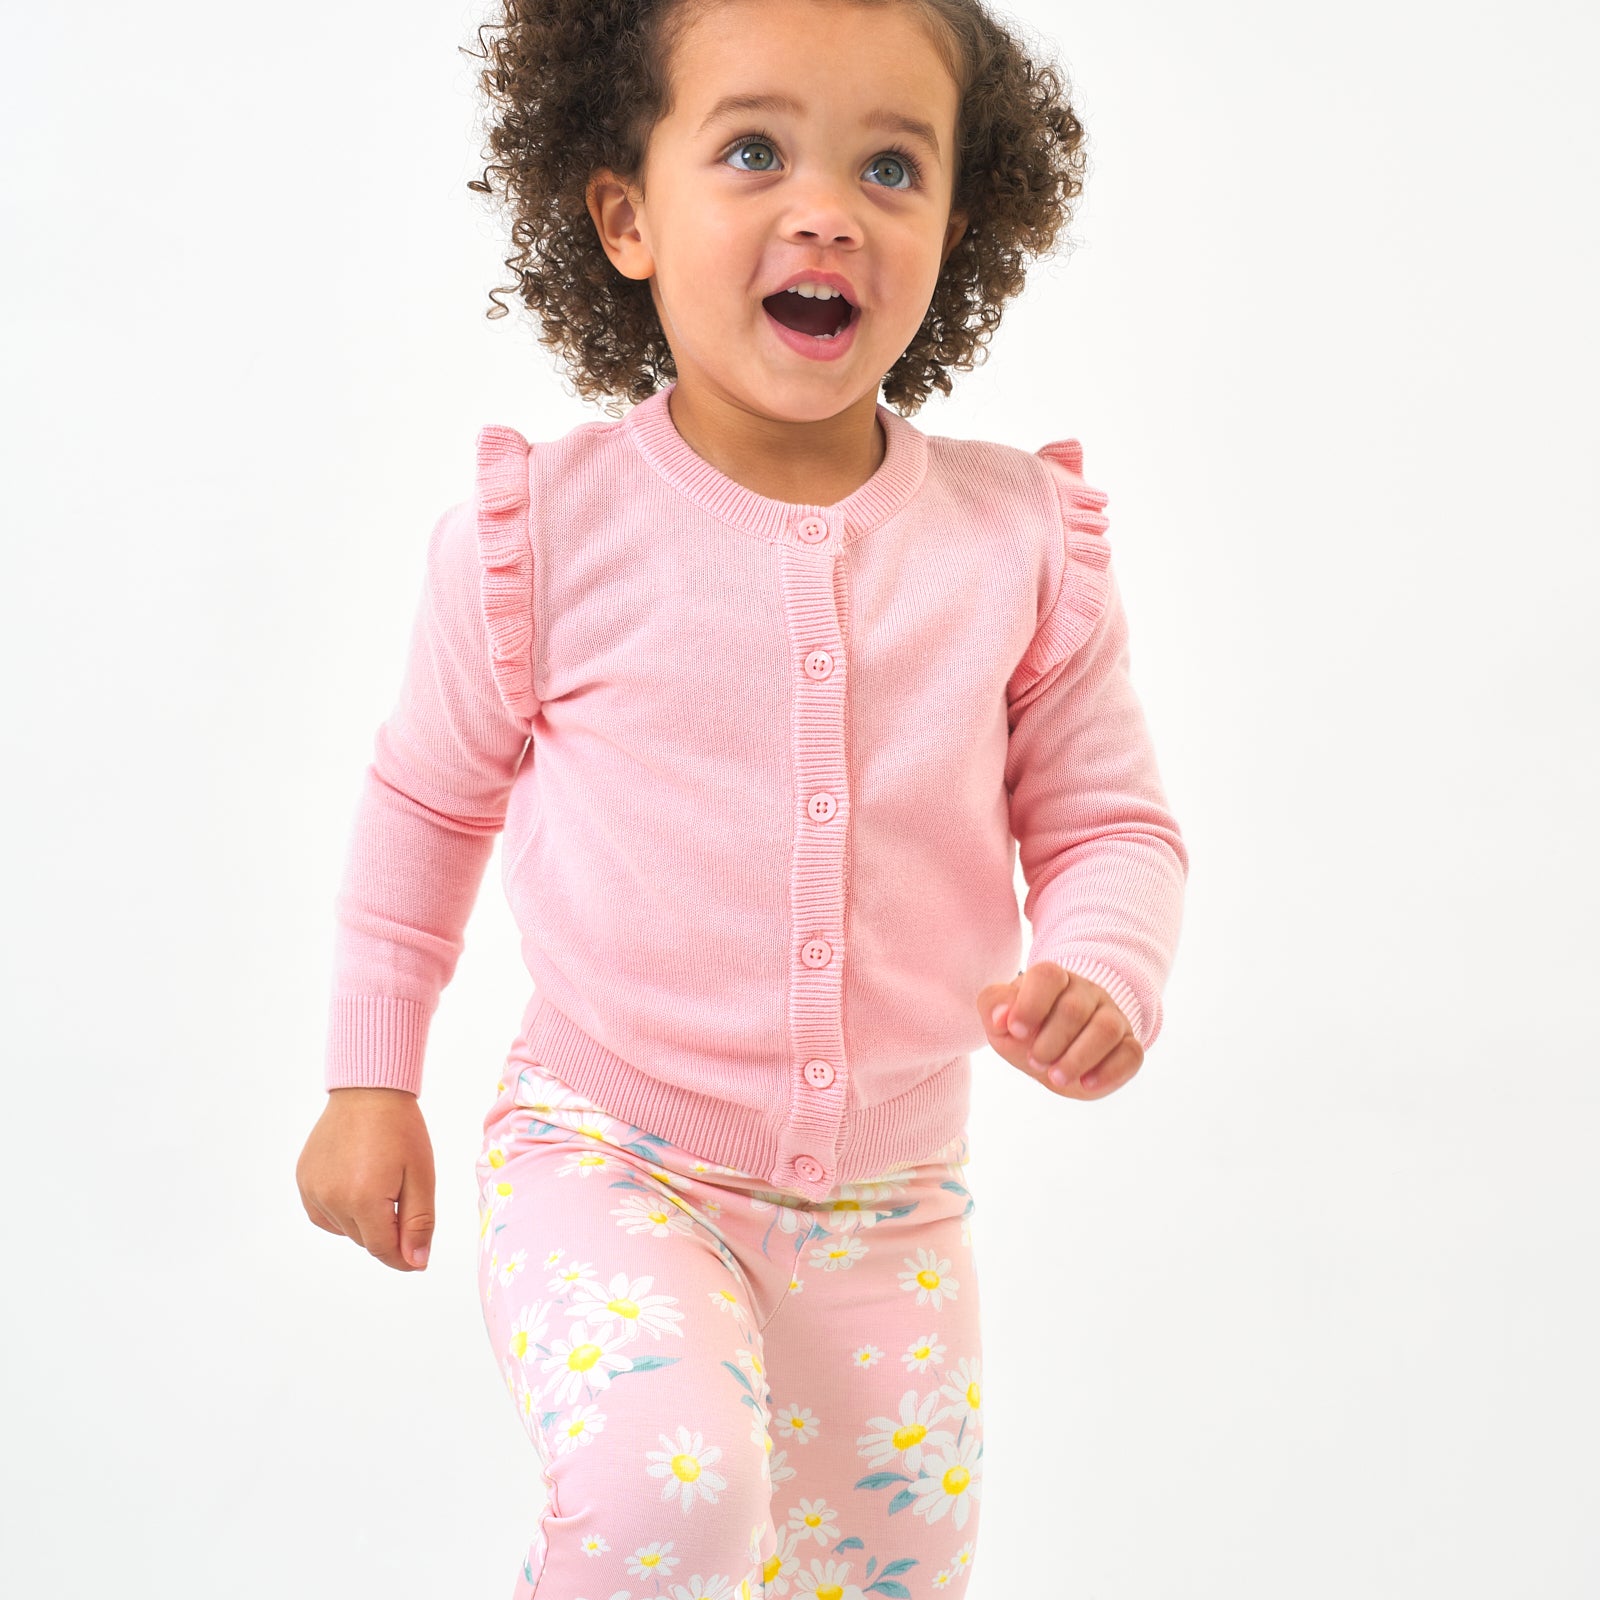 Child wearing a Pink Blossom ruffle cardigan and coordinating leggings